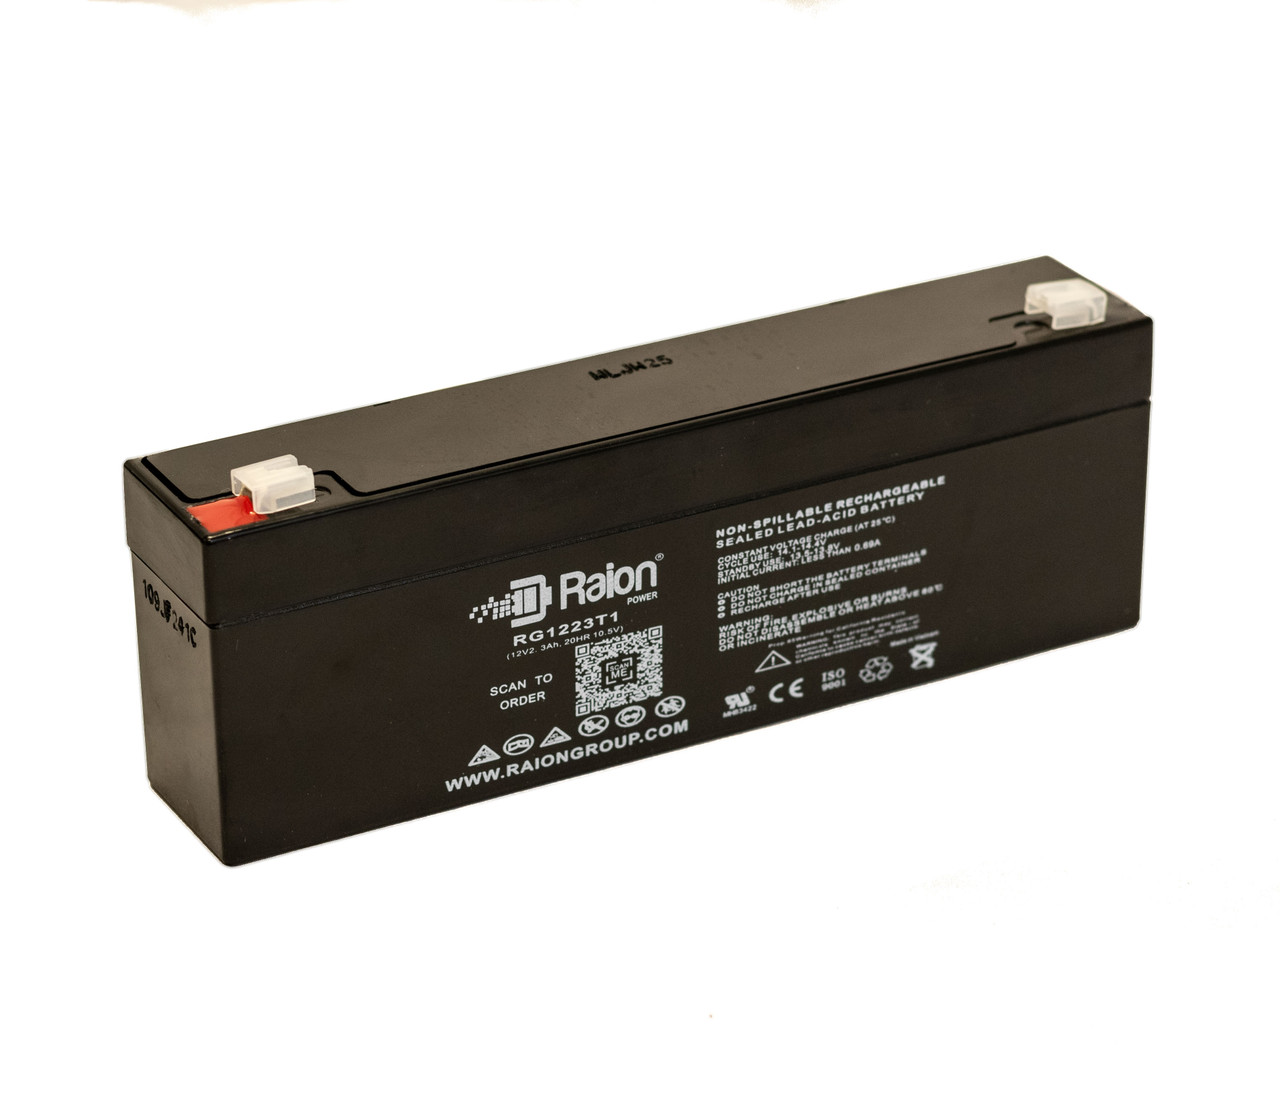 Raion Power RG1223T1 Replacement Battery for Avi 480 Pump